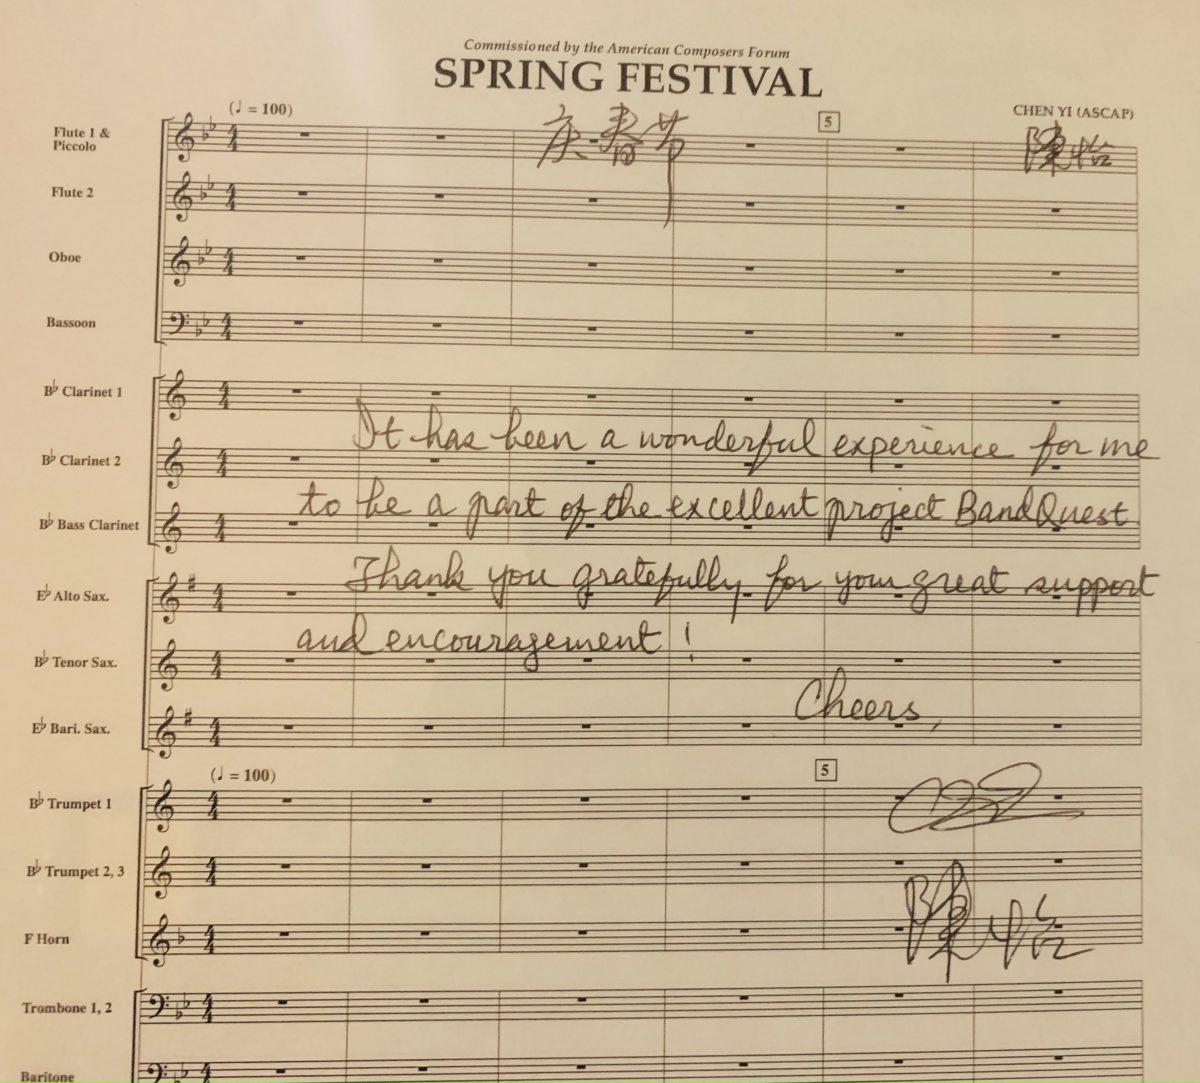 A thank you from Chen Yi on her published score of 'Spring Festival'